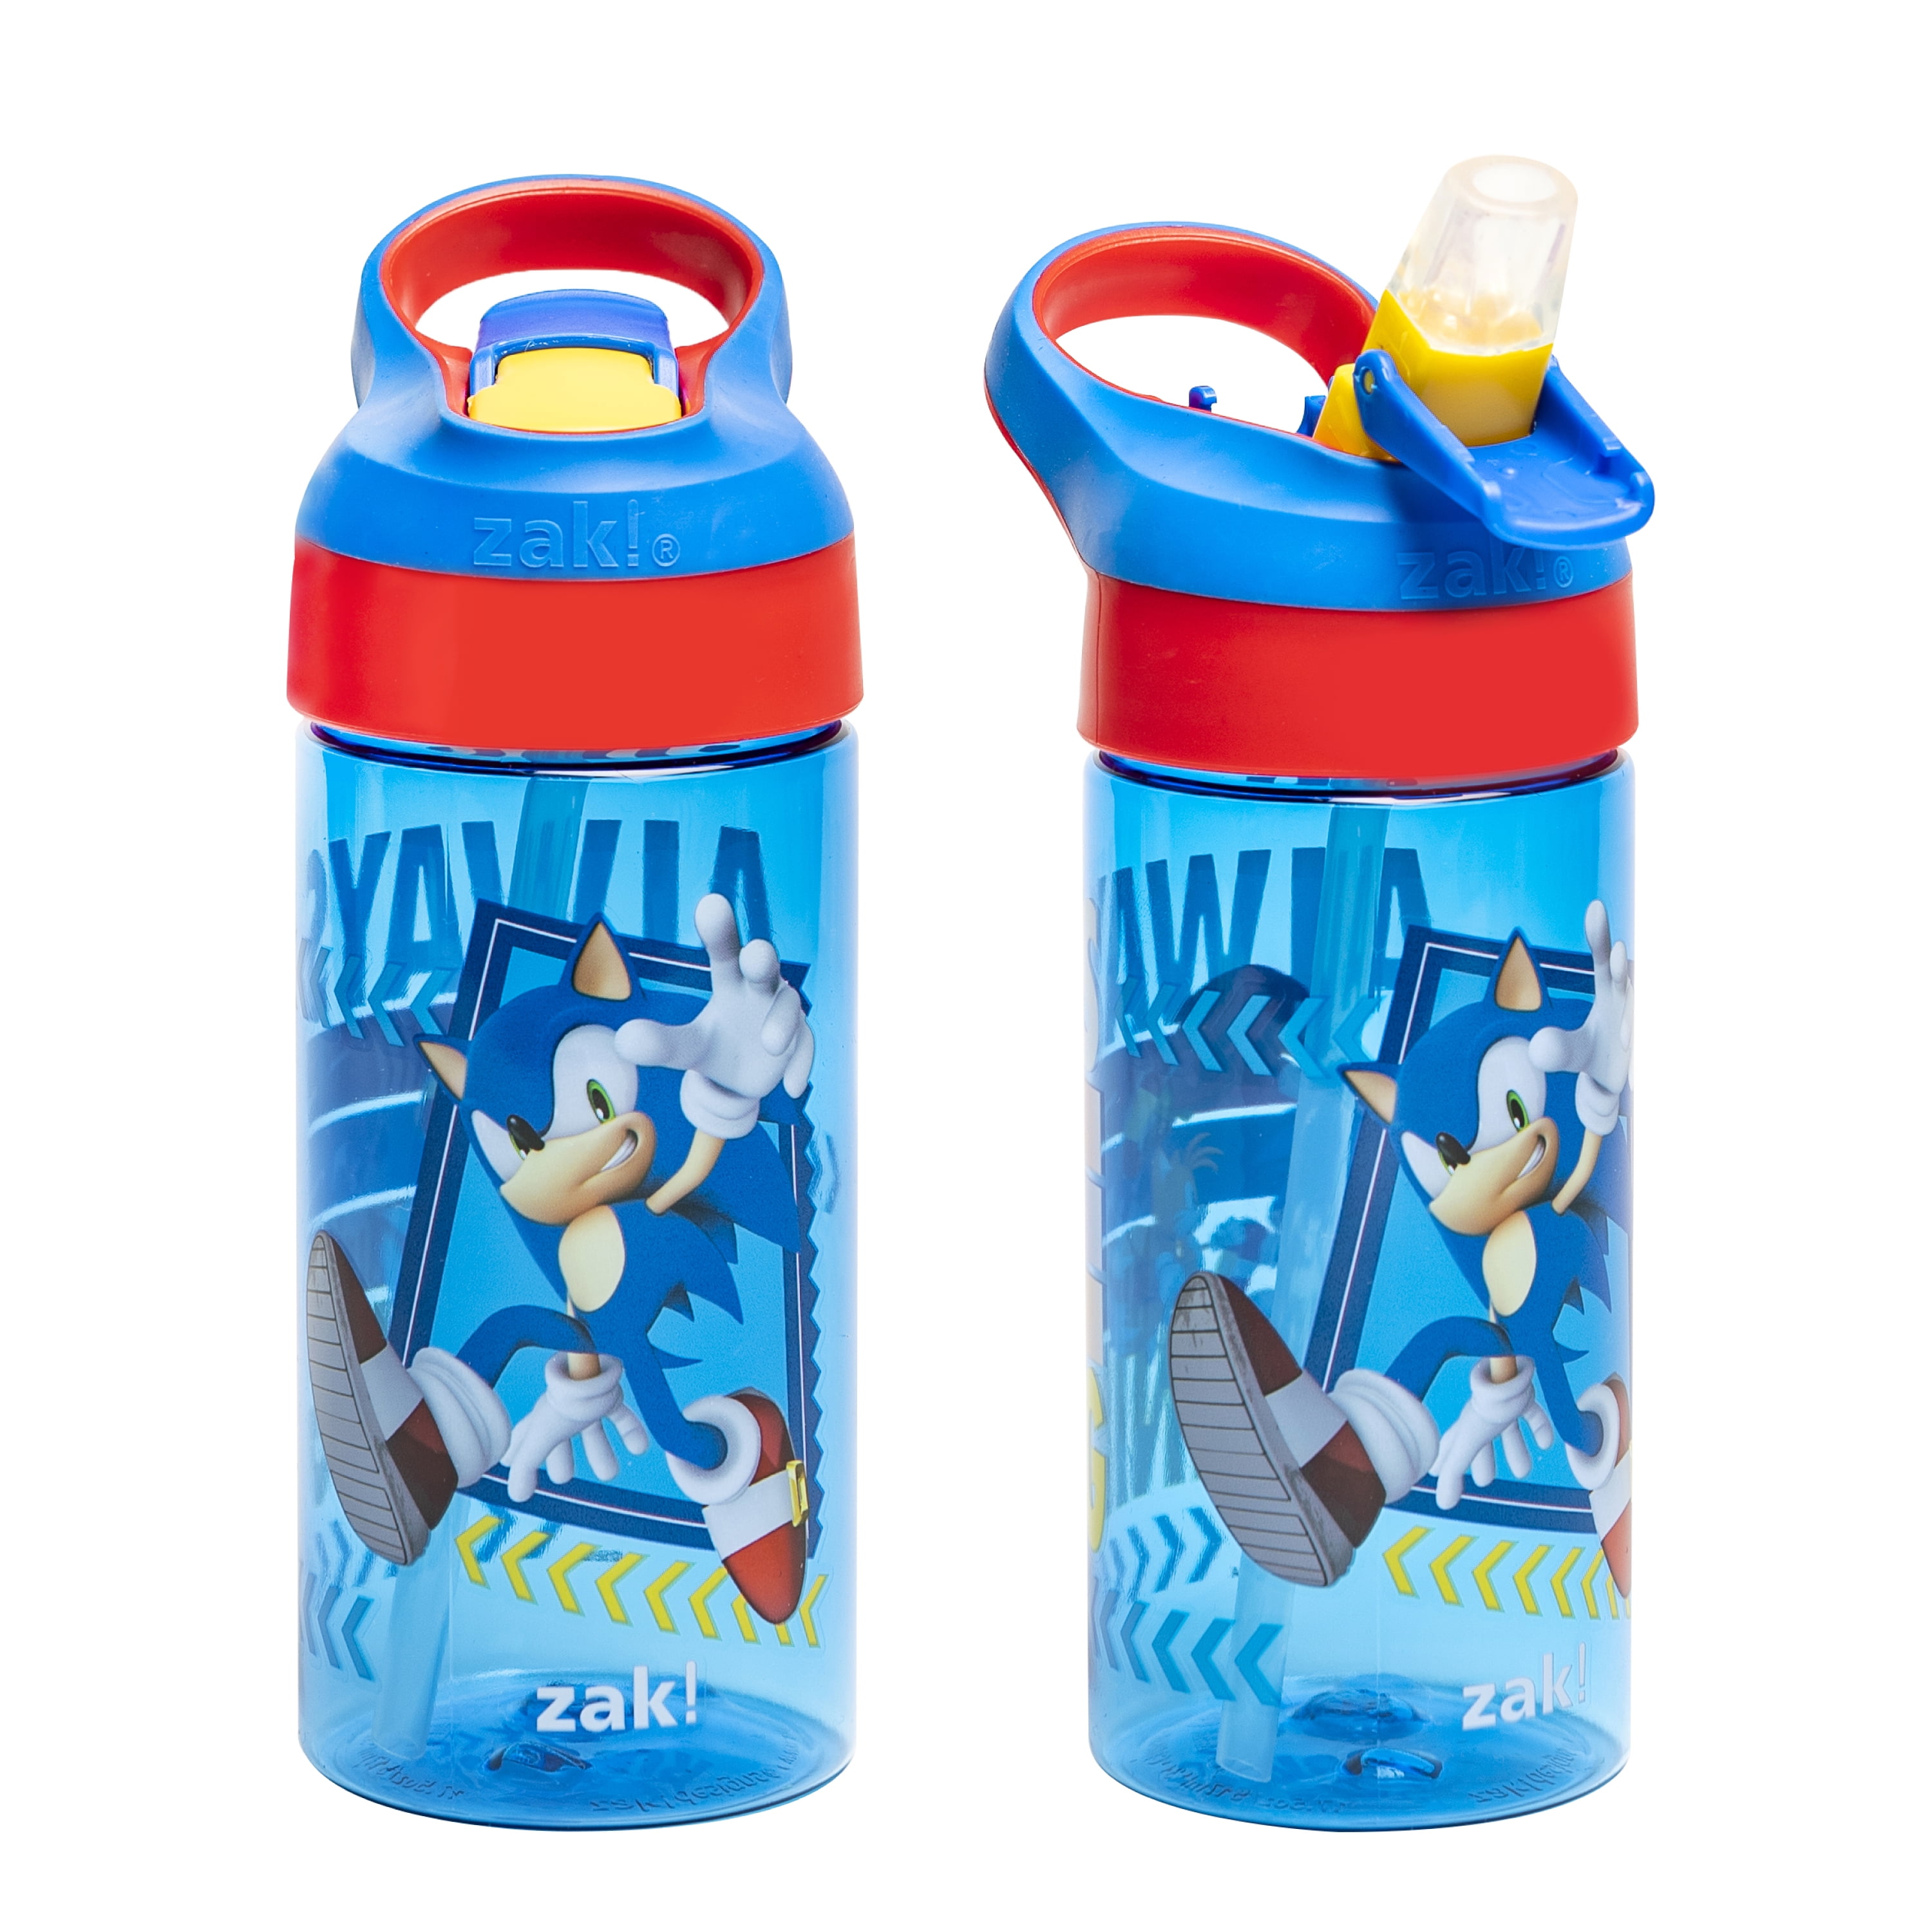 Just Funky Sonic the Hedgehoge 32 oz Sonic, Tails and Knuckles Bottle